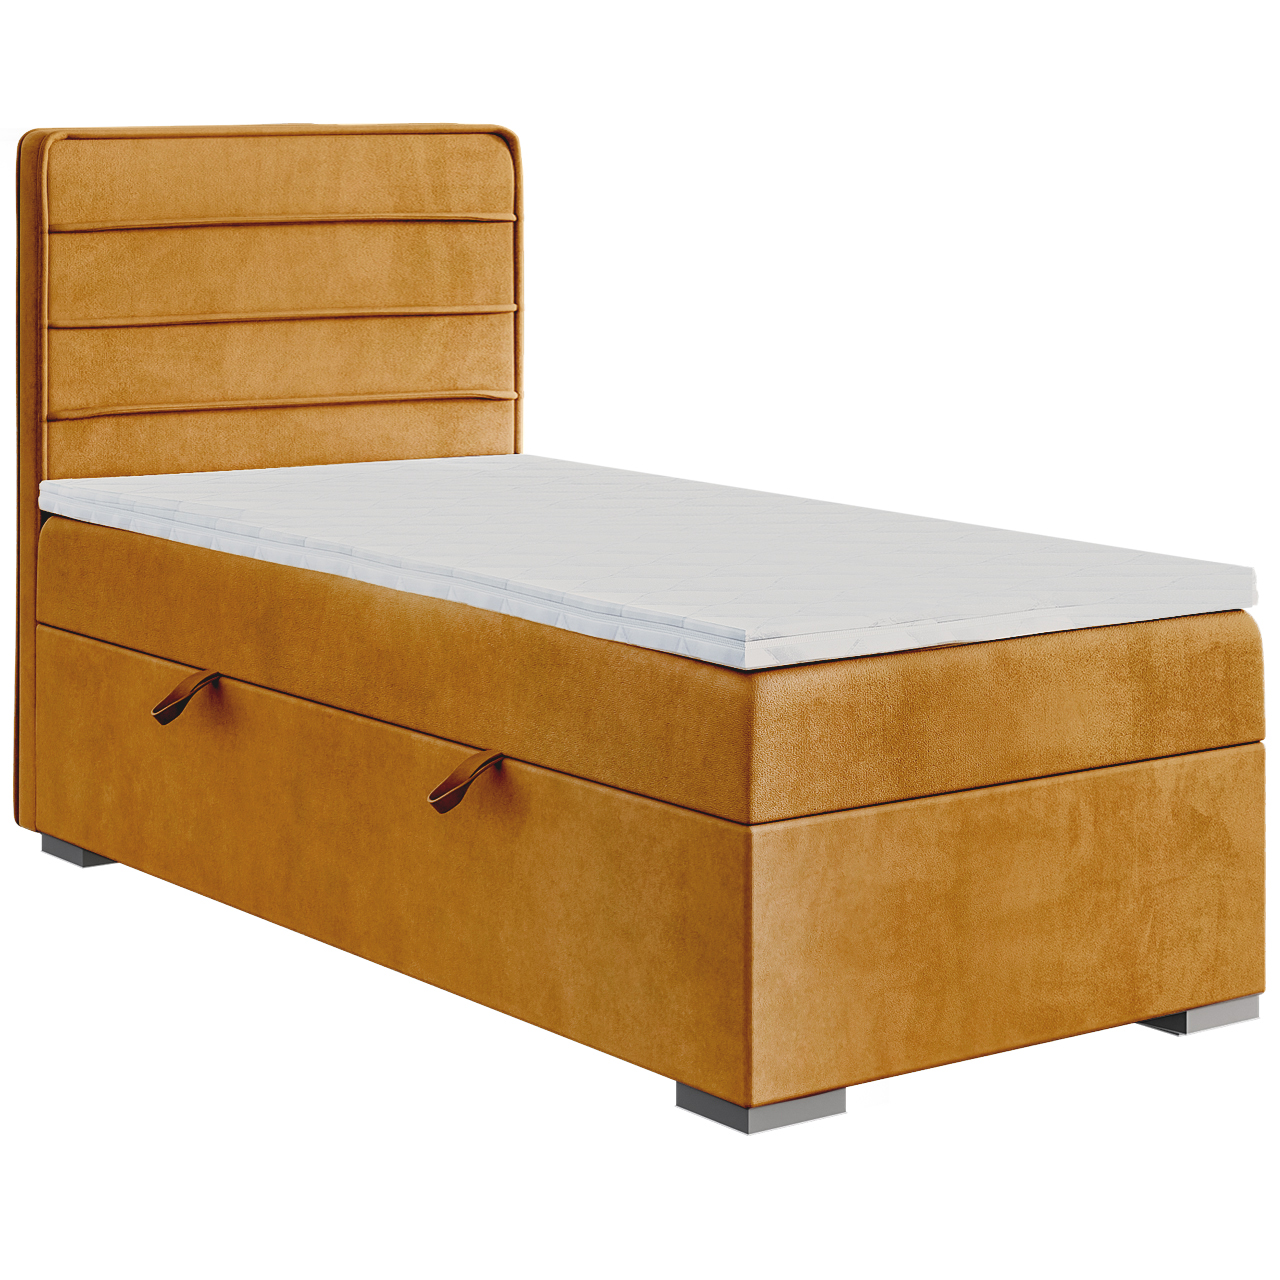 Upholstered bed BEROTTI 80x200 left riviera 41